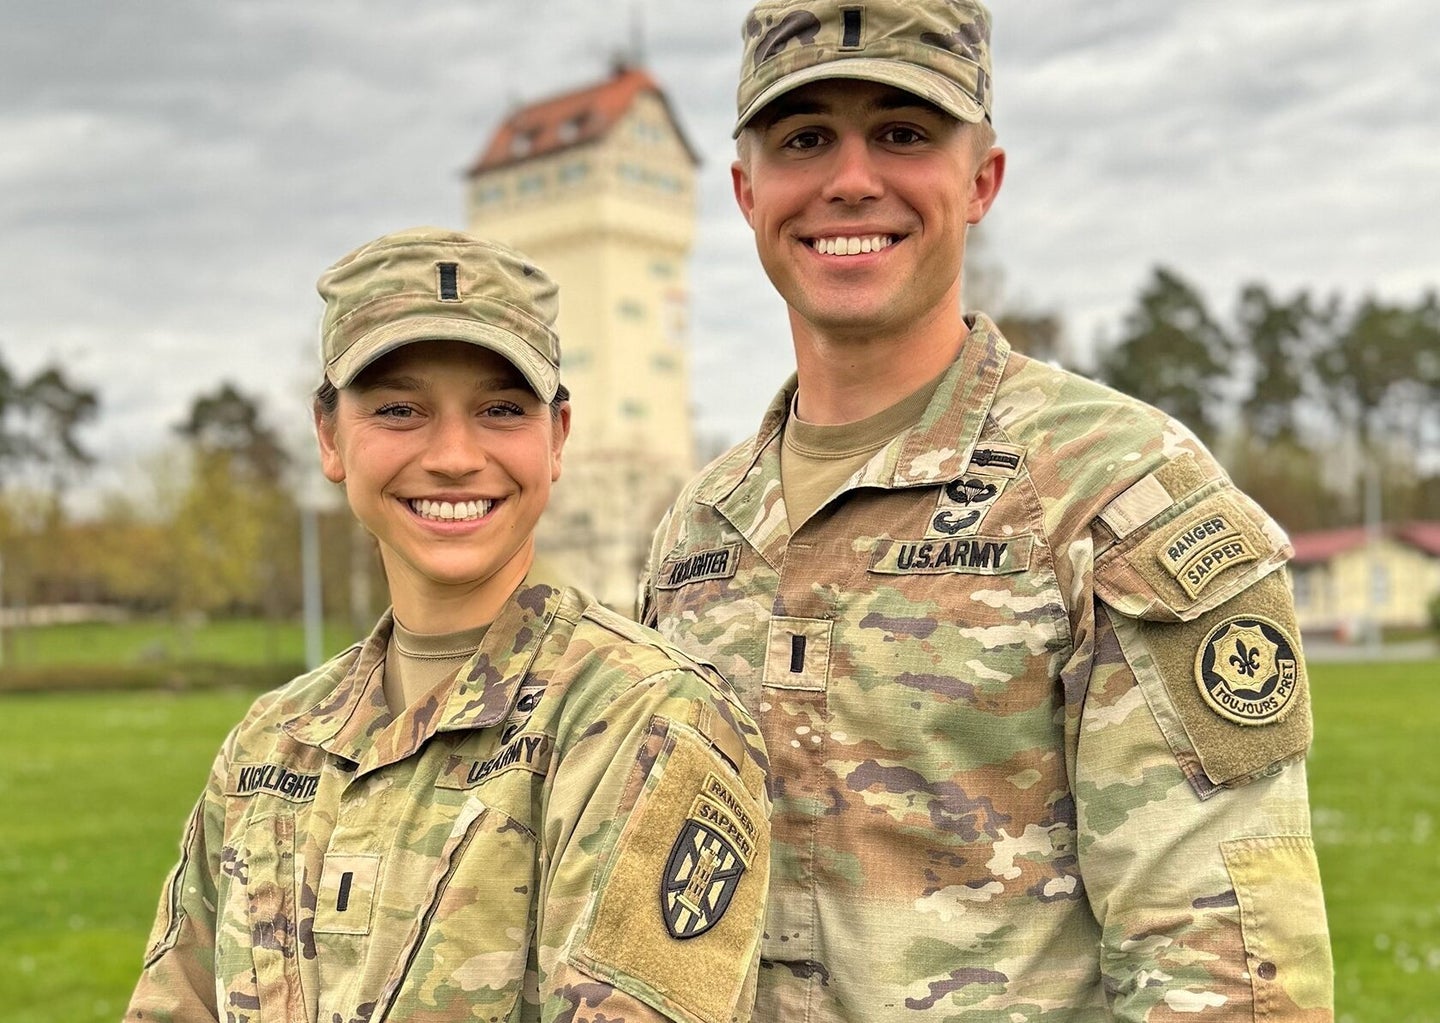 1st Lts. Rachel and Samuel Kicklighter are a married couple stationed in different Army Engineer units in Germany. They have each completed Airborne, Air Assault and Ranger schools in their brief Army careers, and they were back-to-back Sapper Leader Course Distinguished Leadership Award recipients this year. Rachel is now getting ready to represent her unit in the Best Sapper Competition, which kicks off April 19 in Roubidoux Park in Waynesville. (Courtesy photo by Brian Hill)